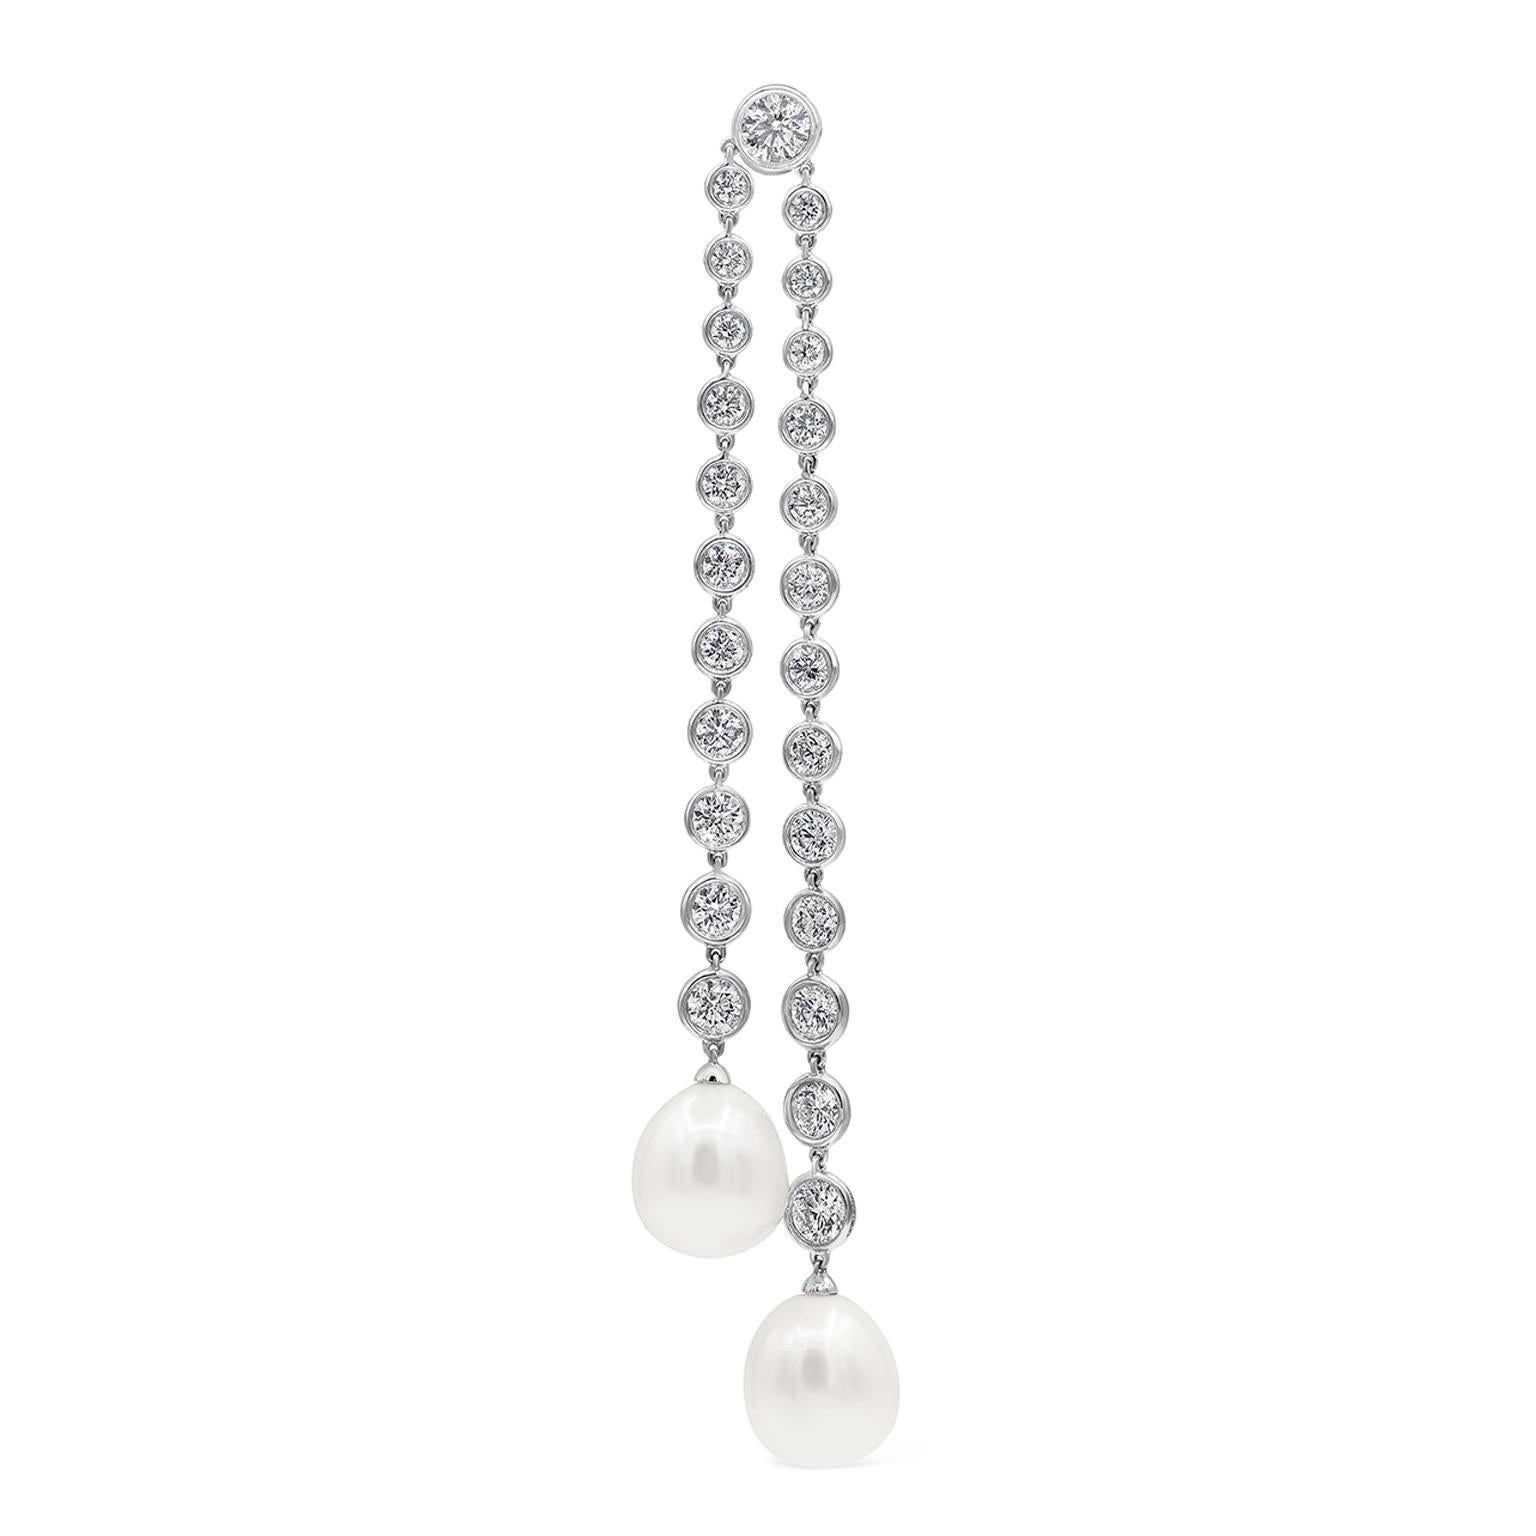 A elegant and magnificent dangle earrings featuring natural south sea pearls suspended on an 18k white gold chain bezel set with 50 round brilliant diamonds. Diamonds weigh 12.30 carats total. Perfectly made in 18k white gold.